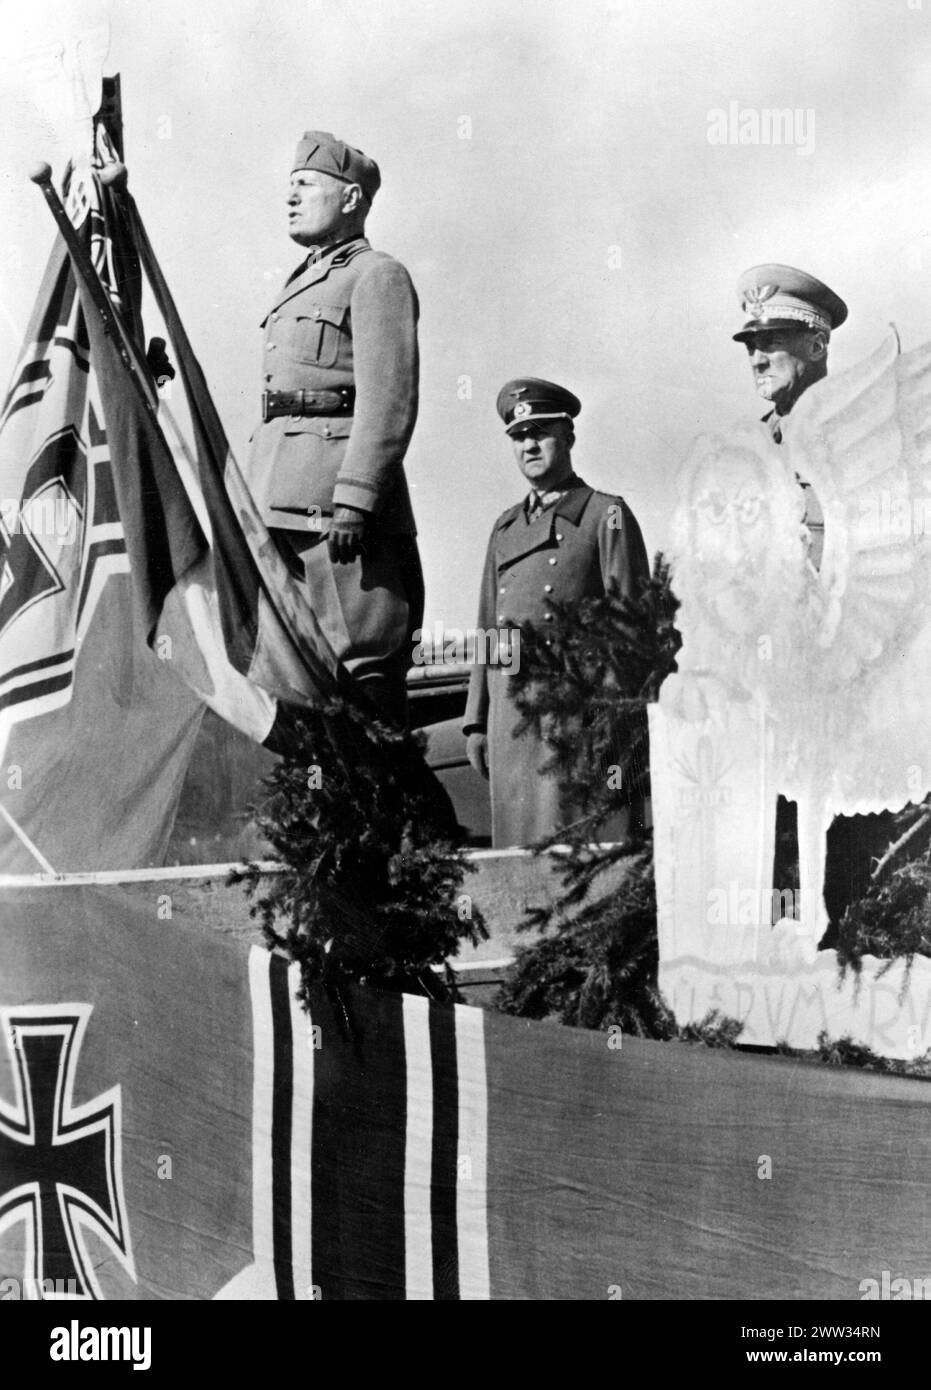 The leader of fascist Italy, Benito Mussolini, speaks to Italian soldiers. Behind him are German Colonel-General Friedrich Fromm (on the right) and Italian Marshal Rodolfo Graziani. April 1944 Stock Photo